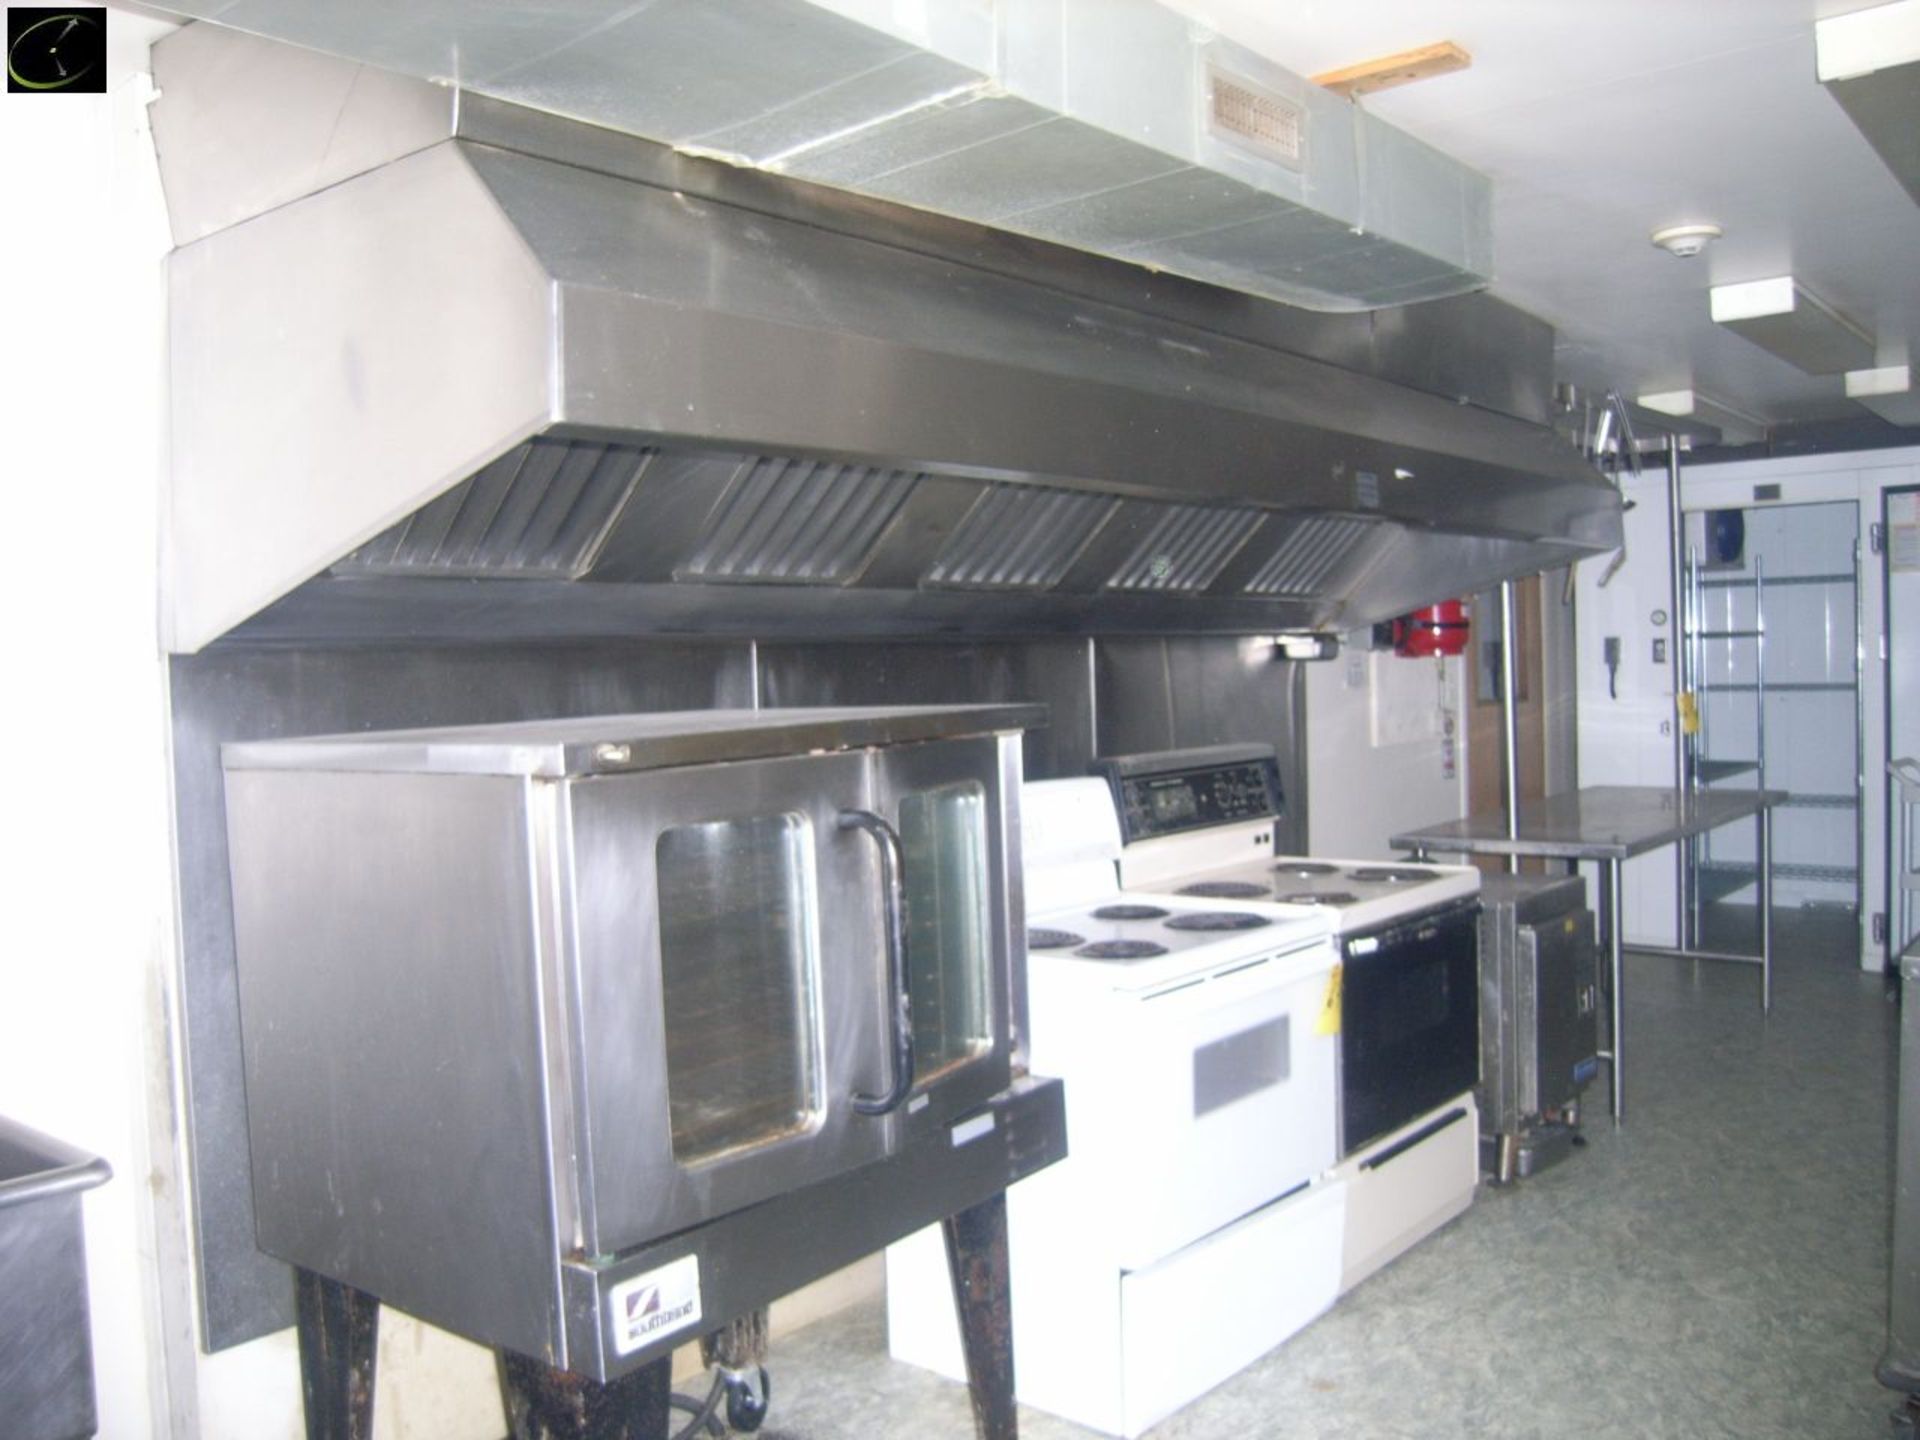 Southbend Stainless Steel Oven, Frigidaire Four Burner Stove, GE Four Burner Stove, Cleveland